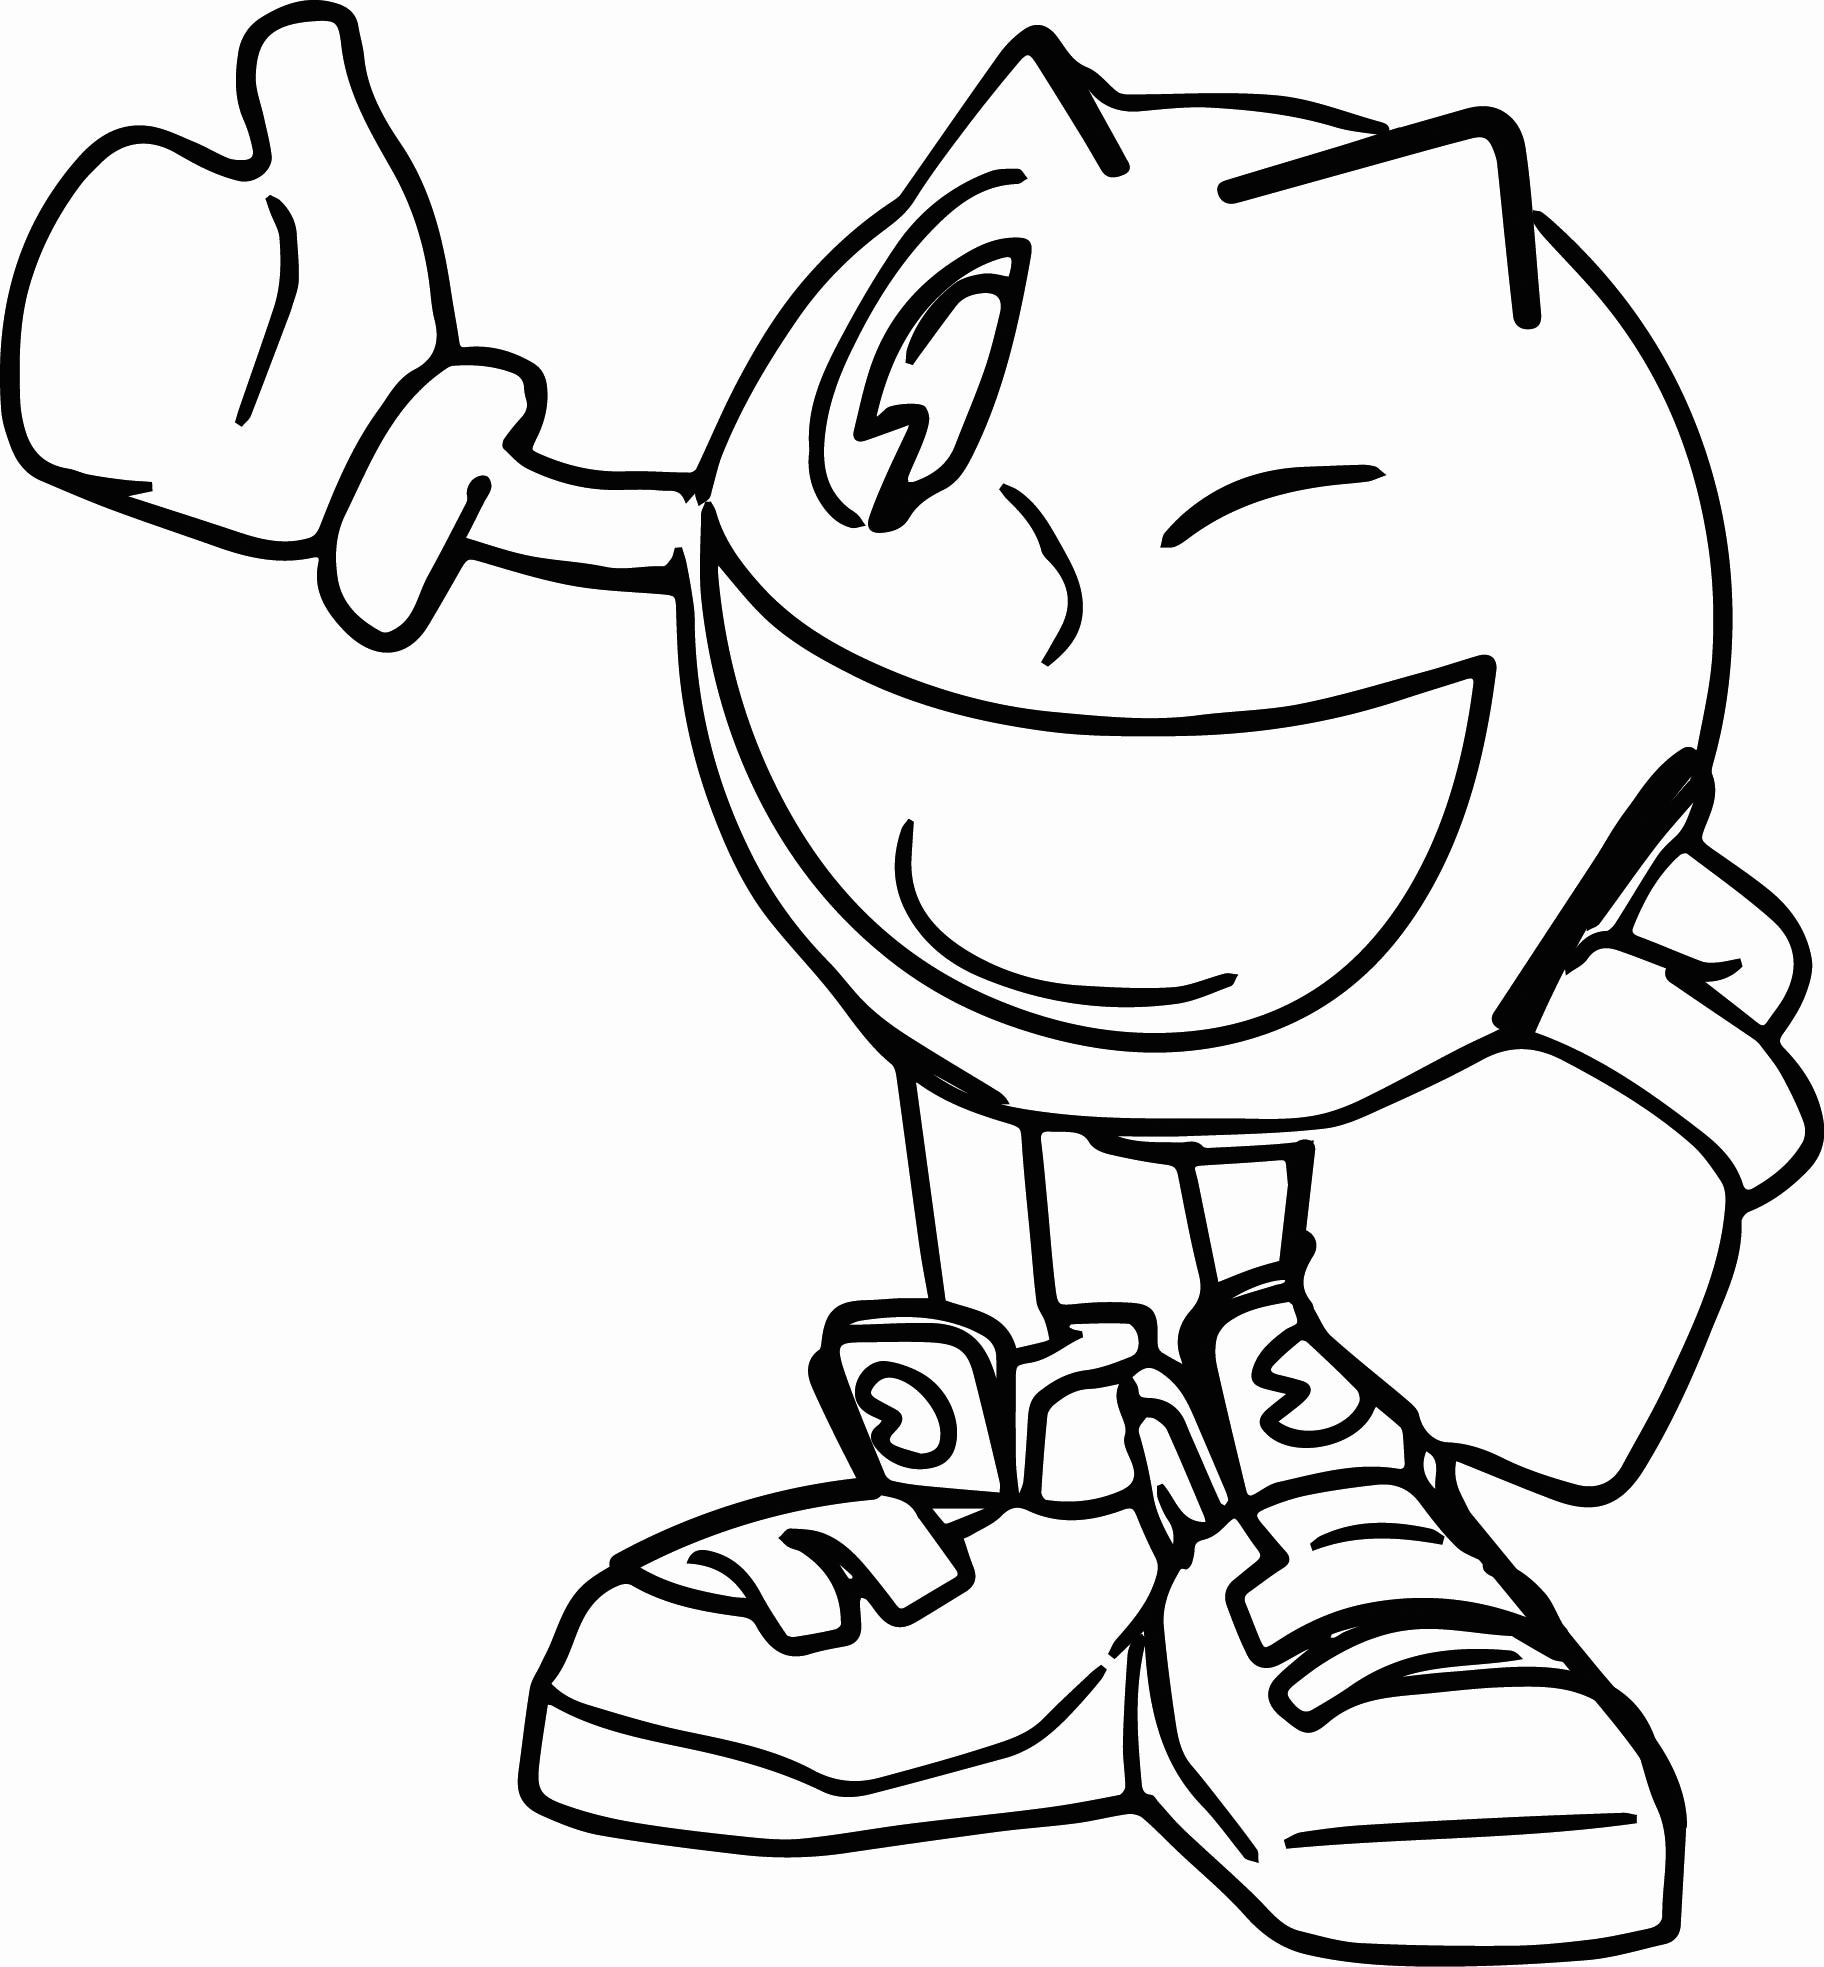 PacMan Coloring Pages Best Coloring Pages For Kids